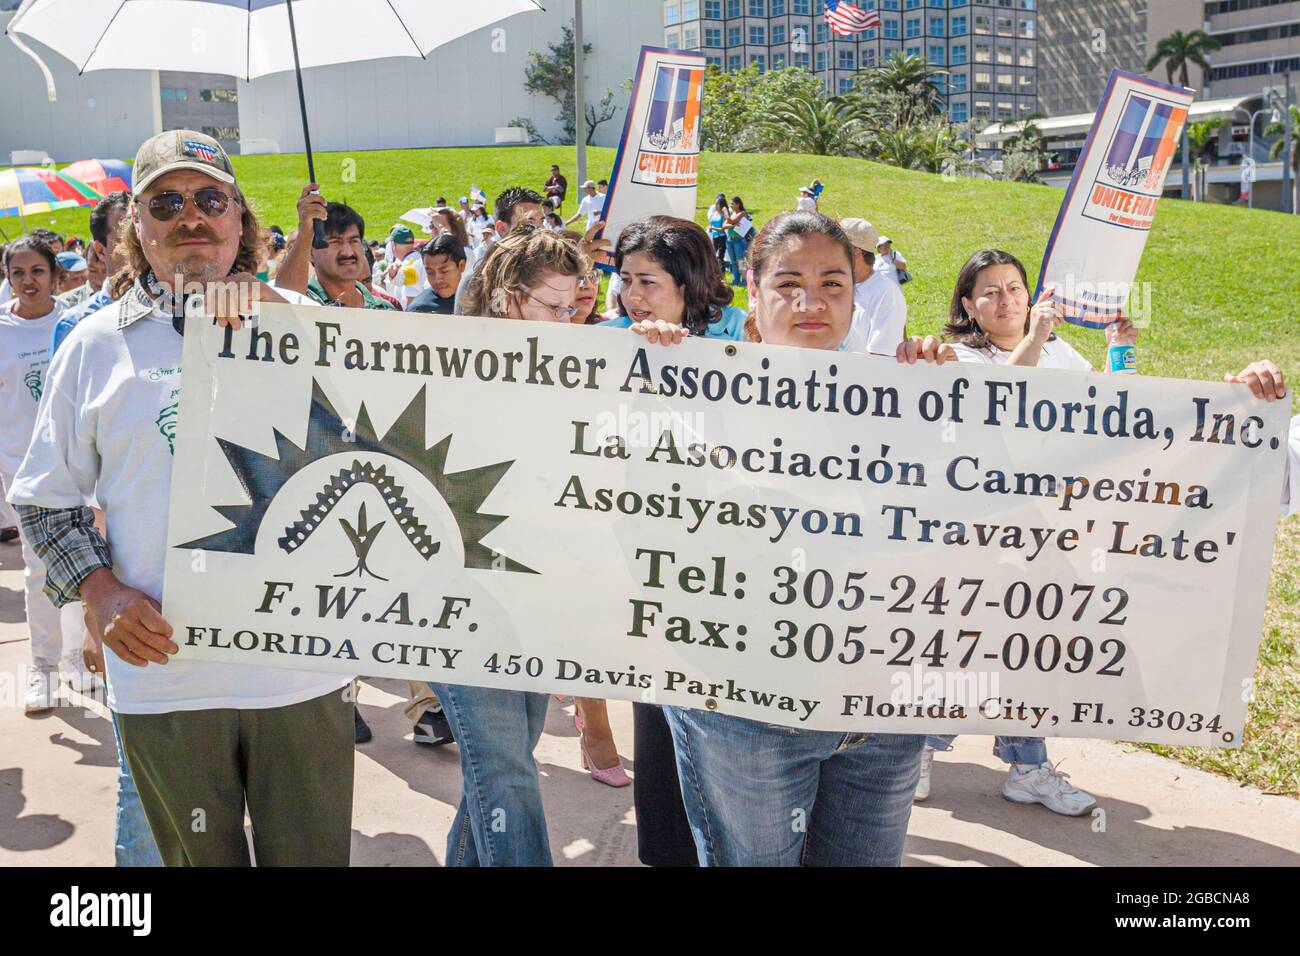 Miami Florida,Bayfront Park,immigrants rights protest,Hispanic men women carrying holding banner Farmworker Association Stock Photo